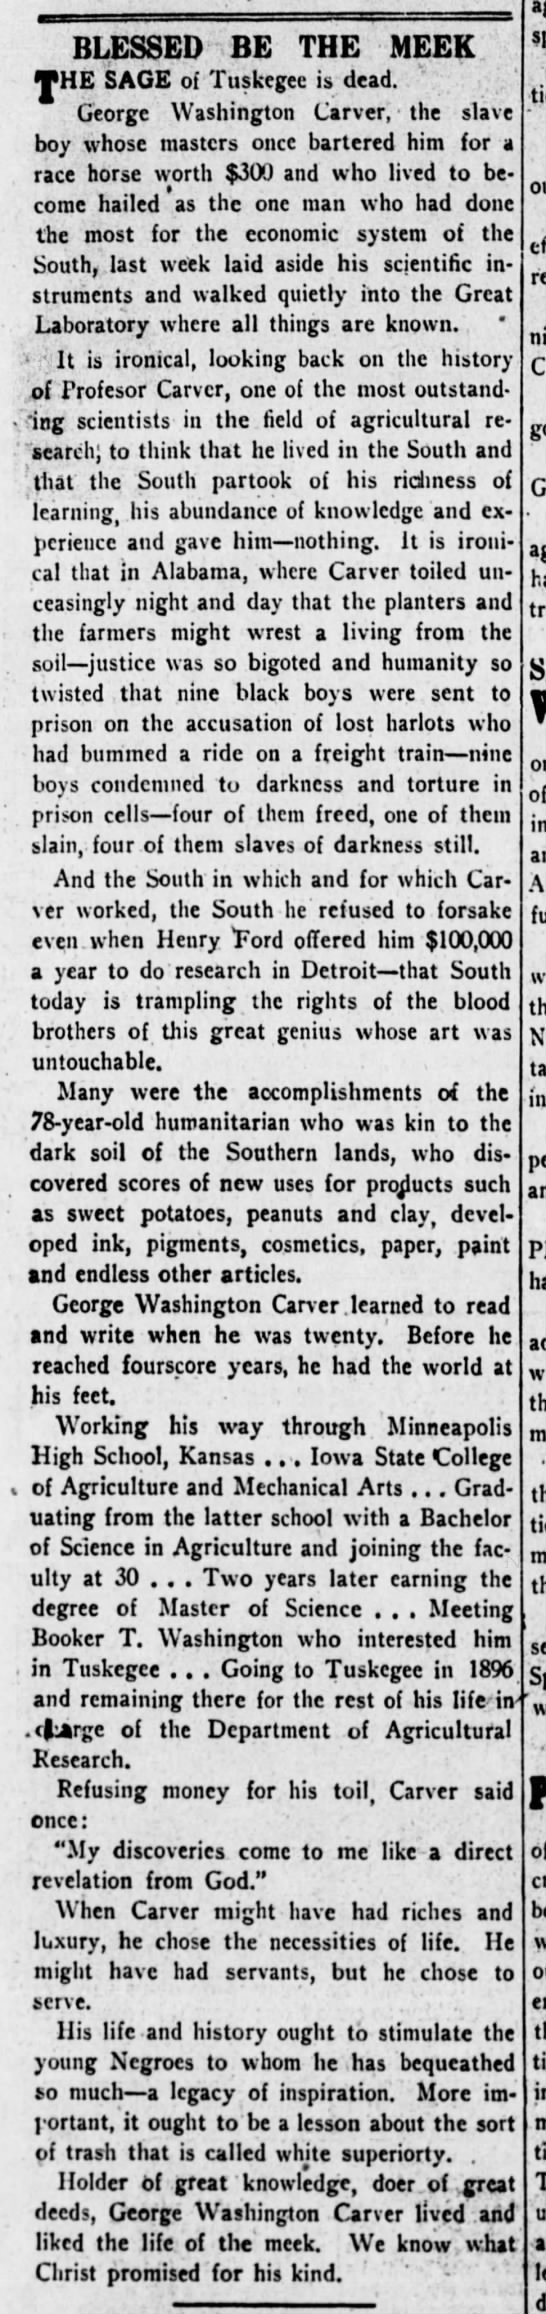 Editorial arguing the South gave "nothing" to George Washington Carver - 